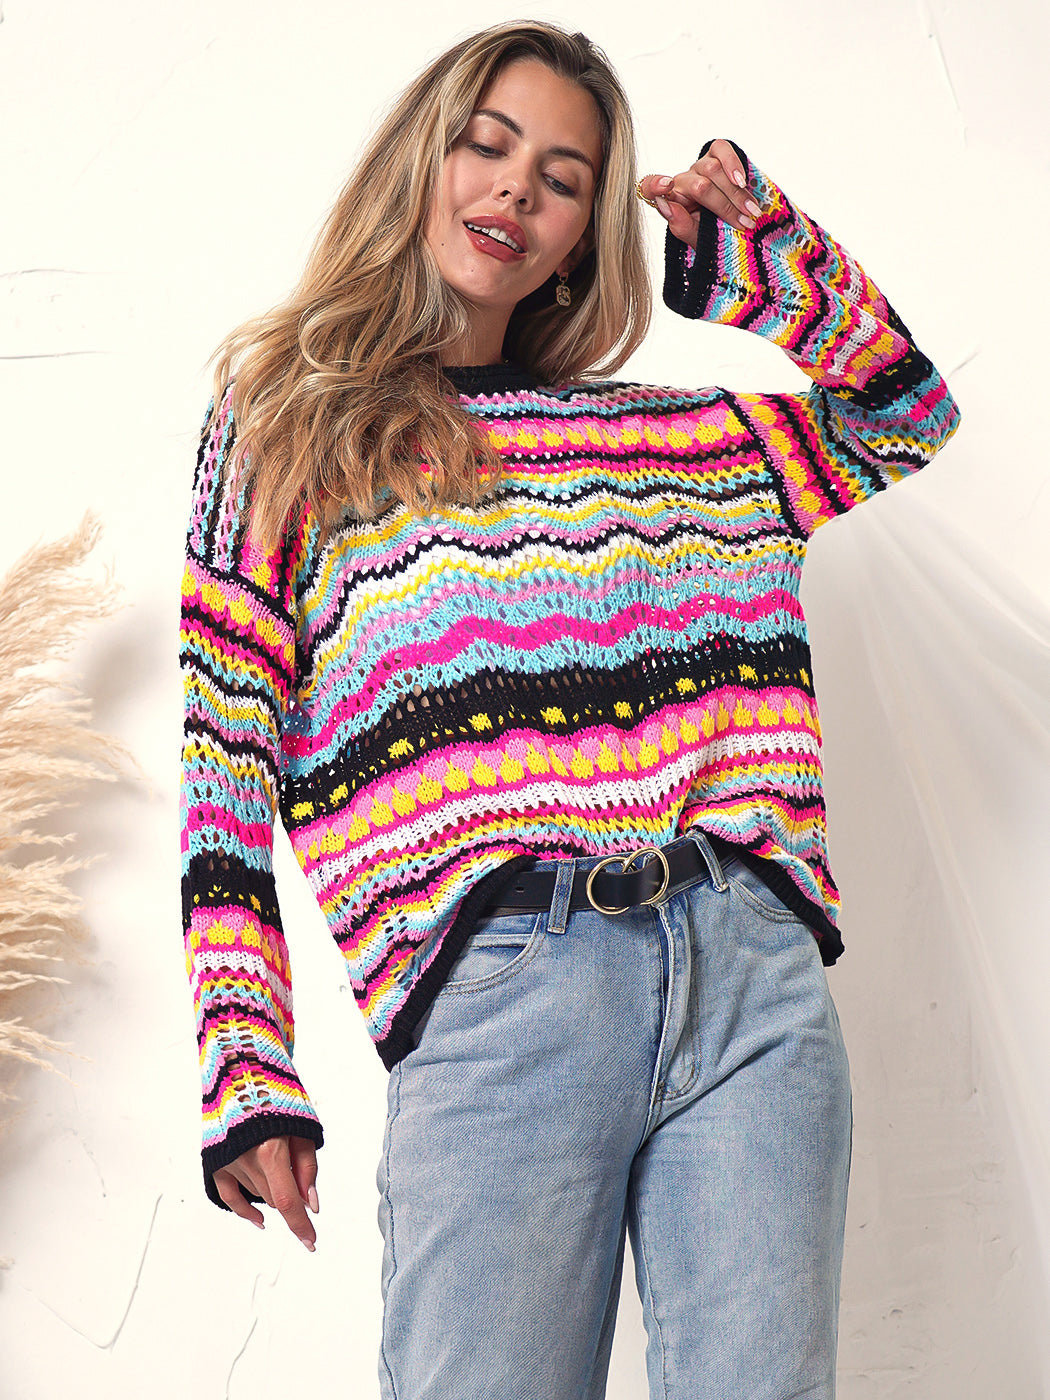 Cut Out Knitted Boho Sweater